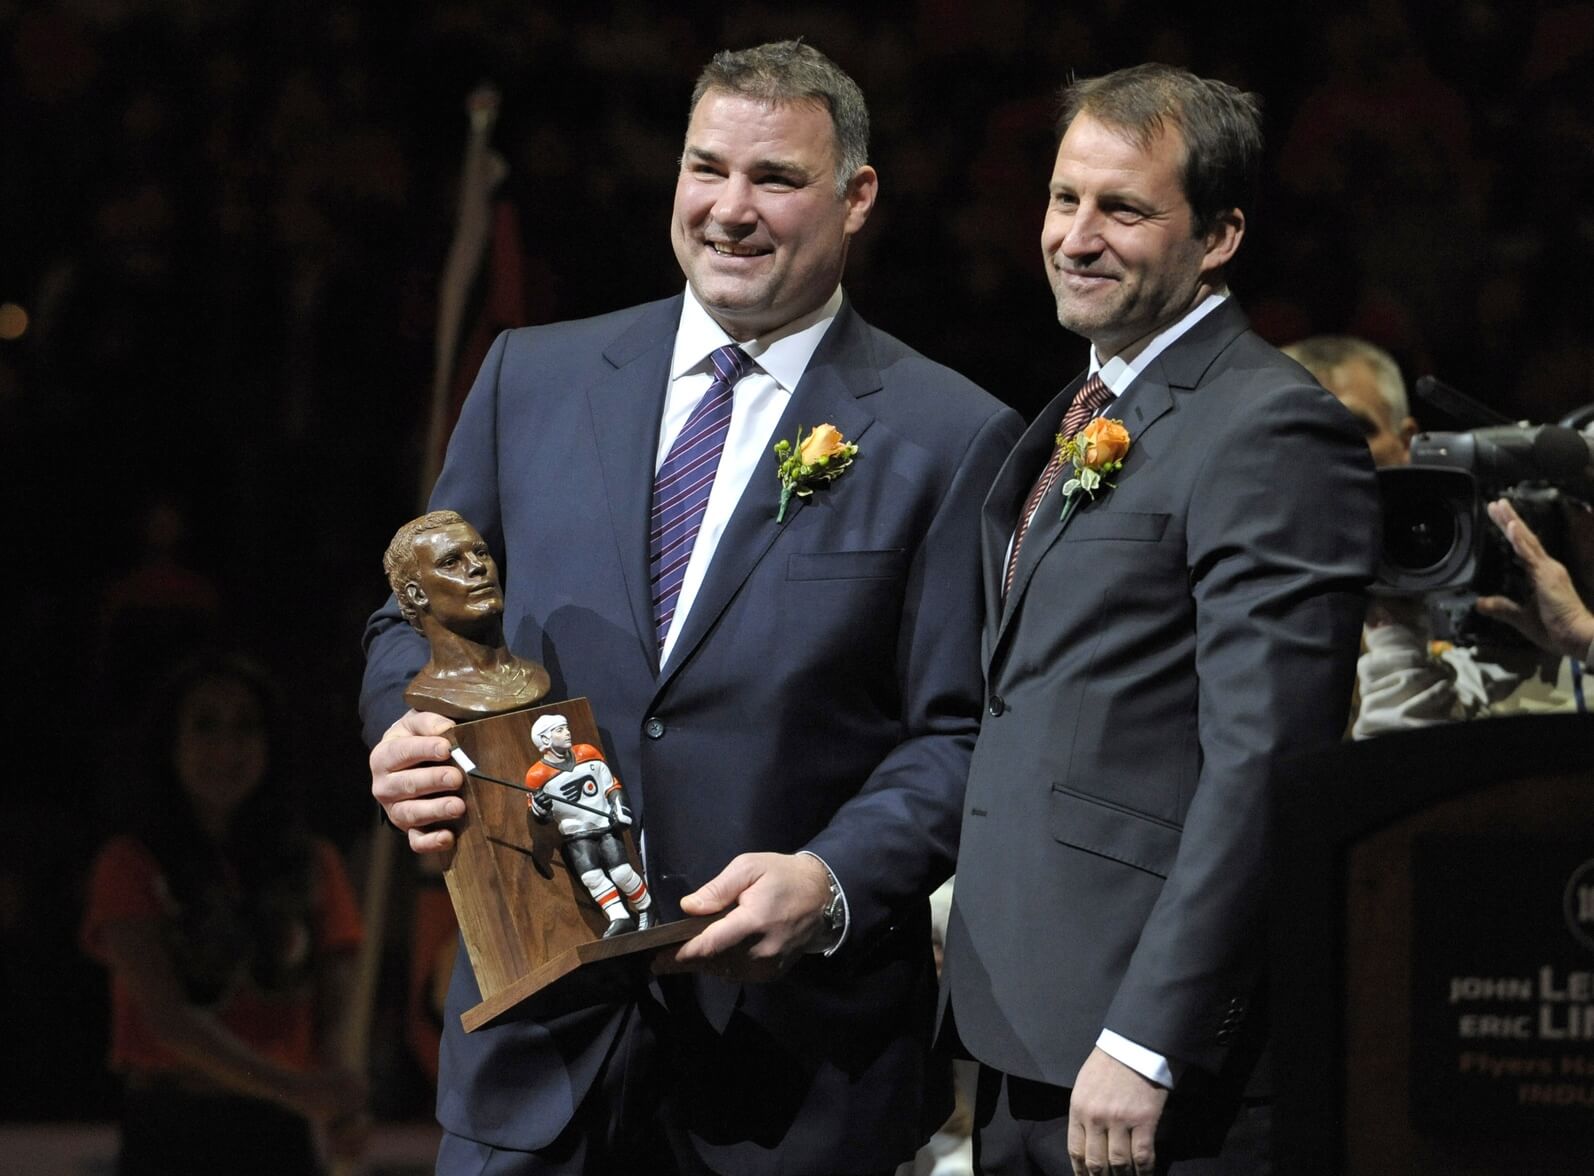 Eric Lindros' Hall of Fame career was without compare